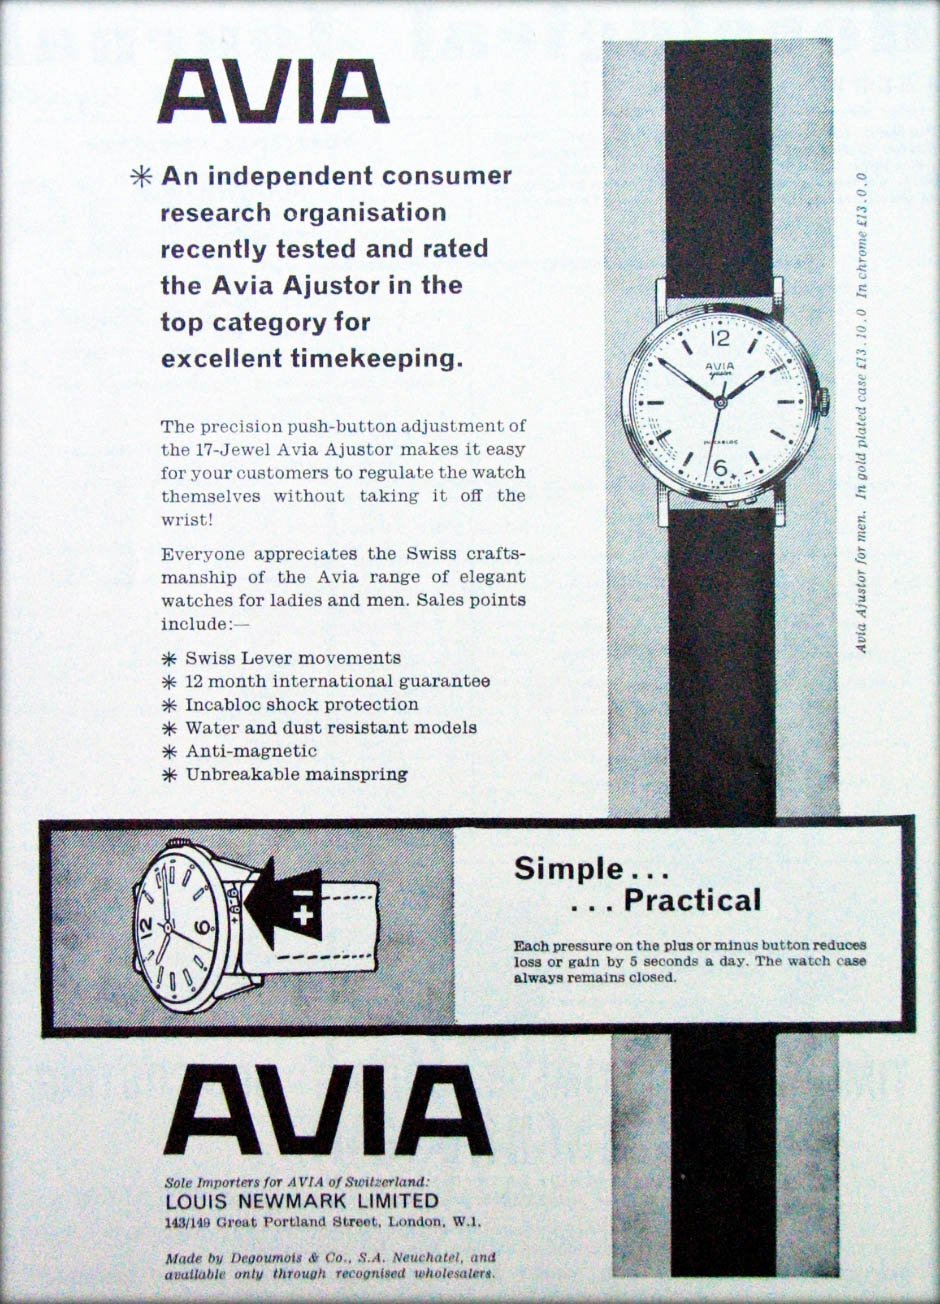 Avia Olympic Sports Watches Vintage Advert – Sportique